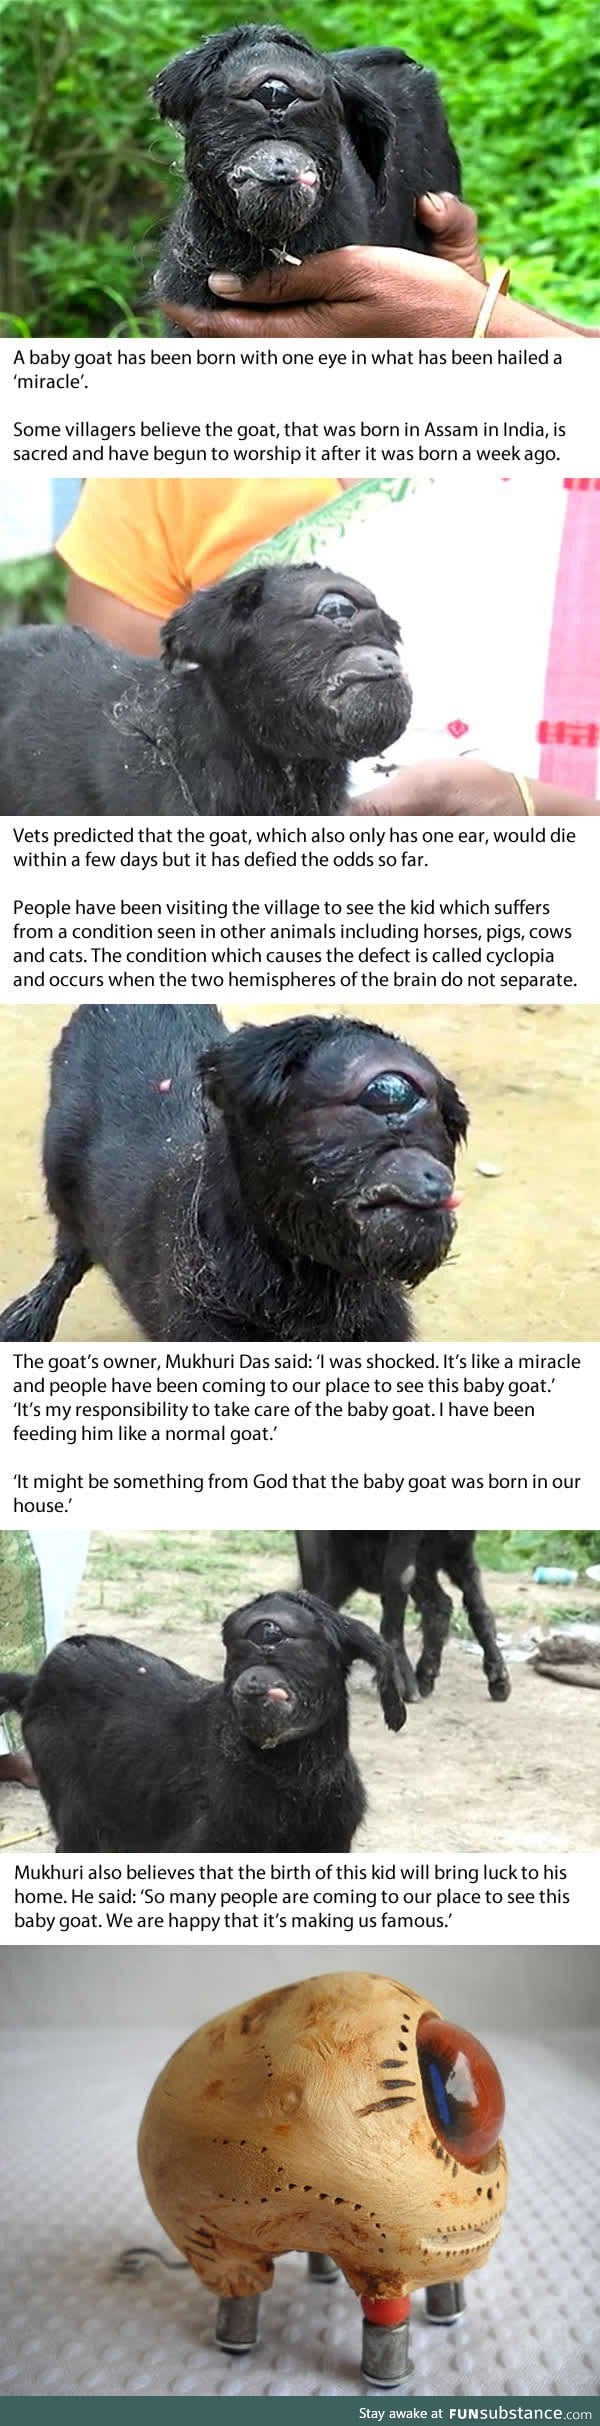 Cyclops goat born with one eye is worshipped by villagers in India